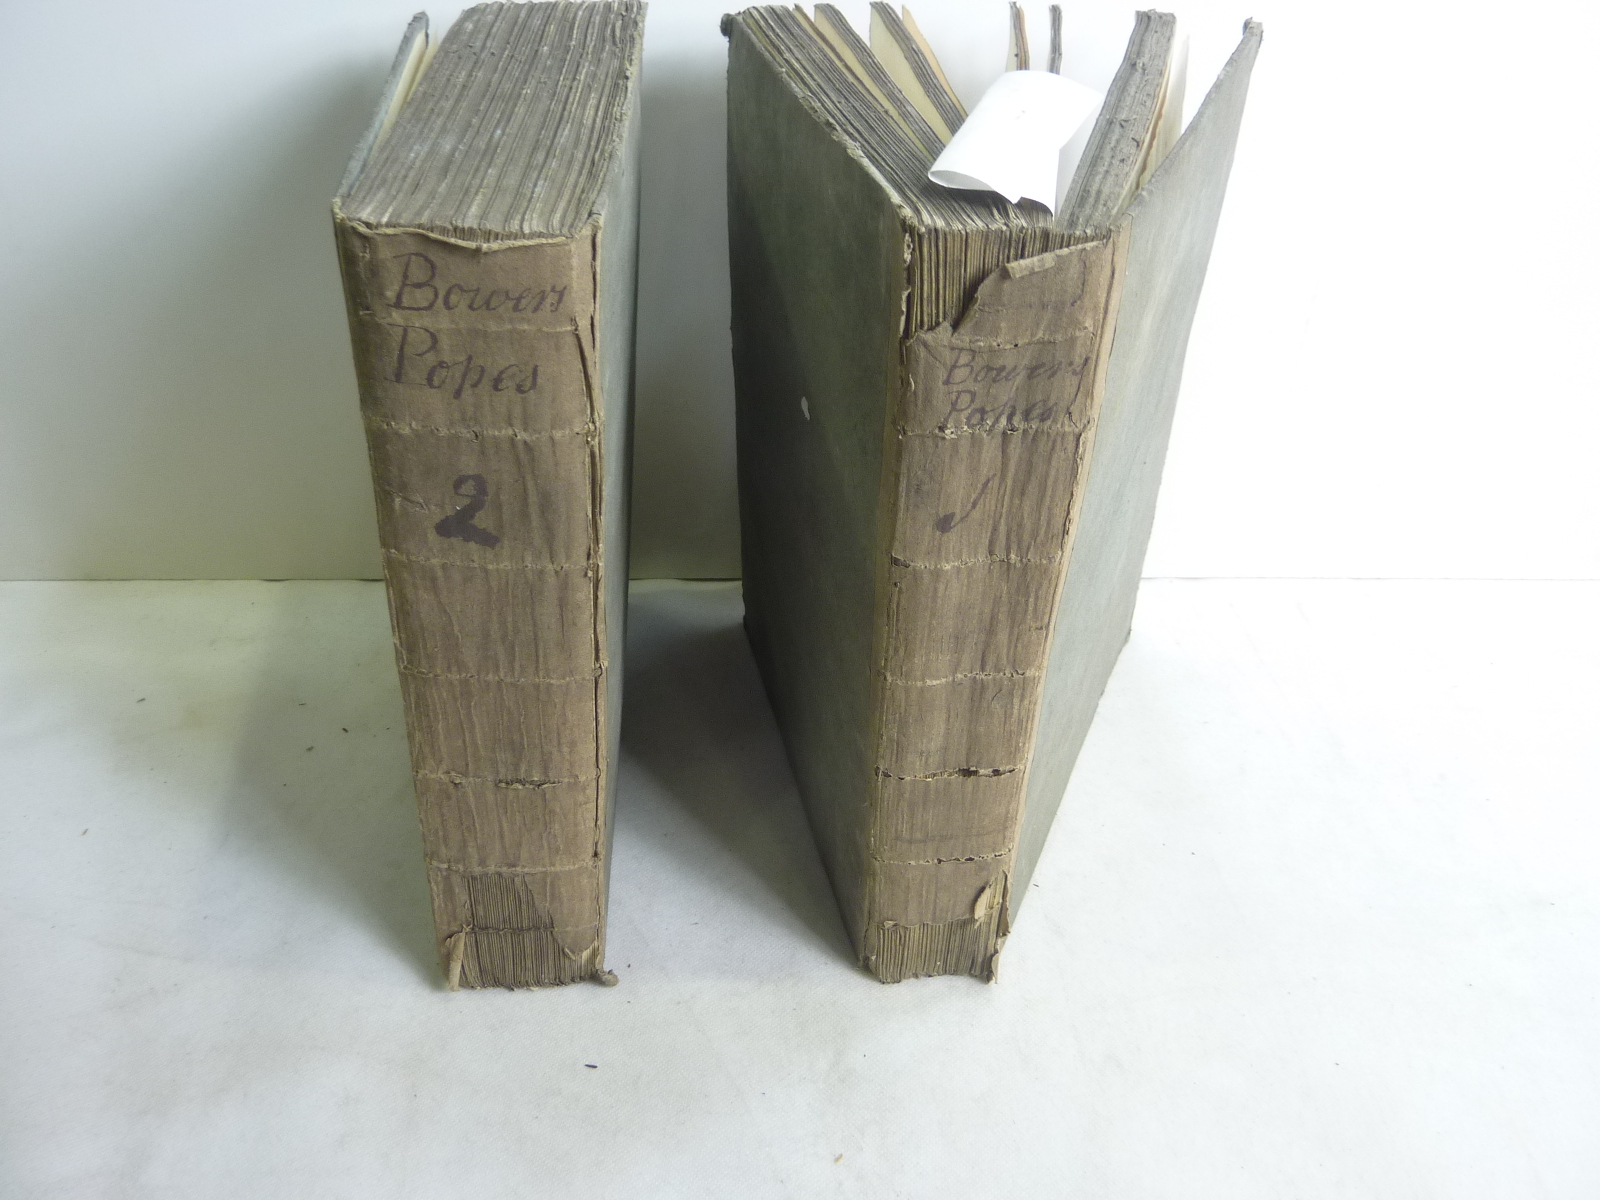 BOWER ARCHIBALD. The History of the Popes. Vols. 1 & 2. Orig. brds. 1750. - Image 3 of 4